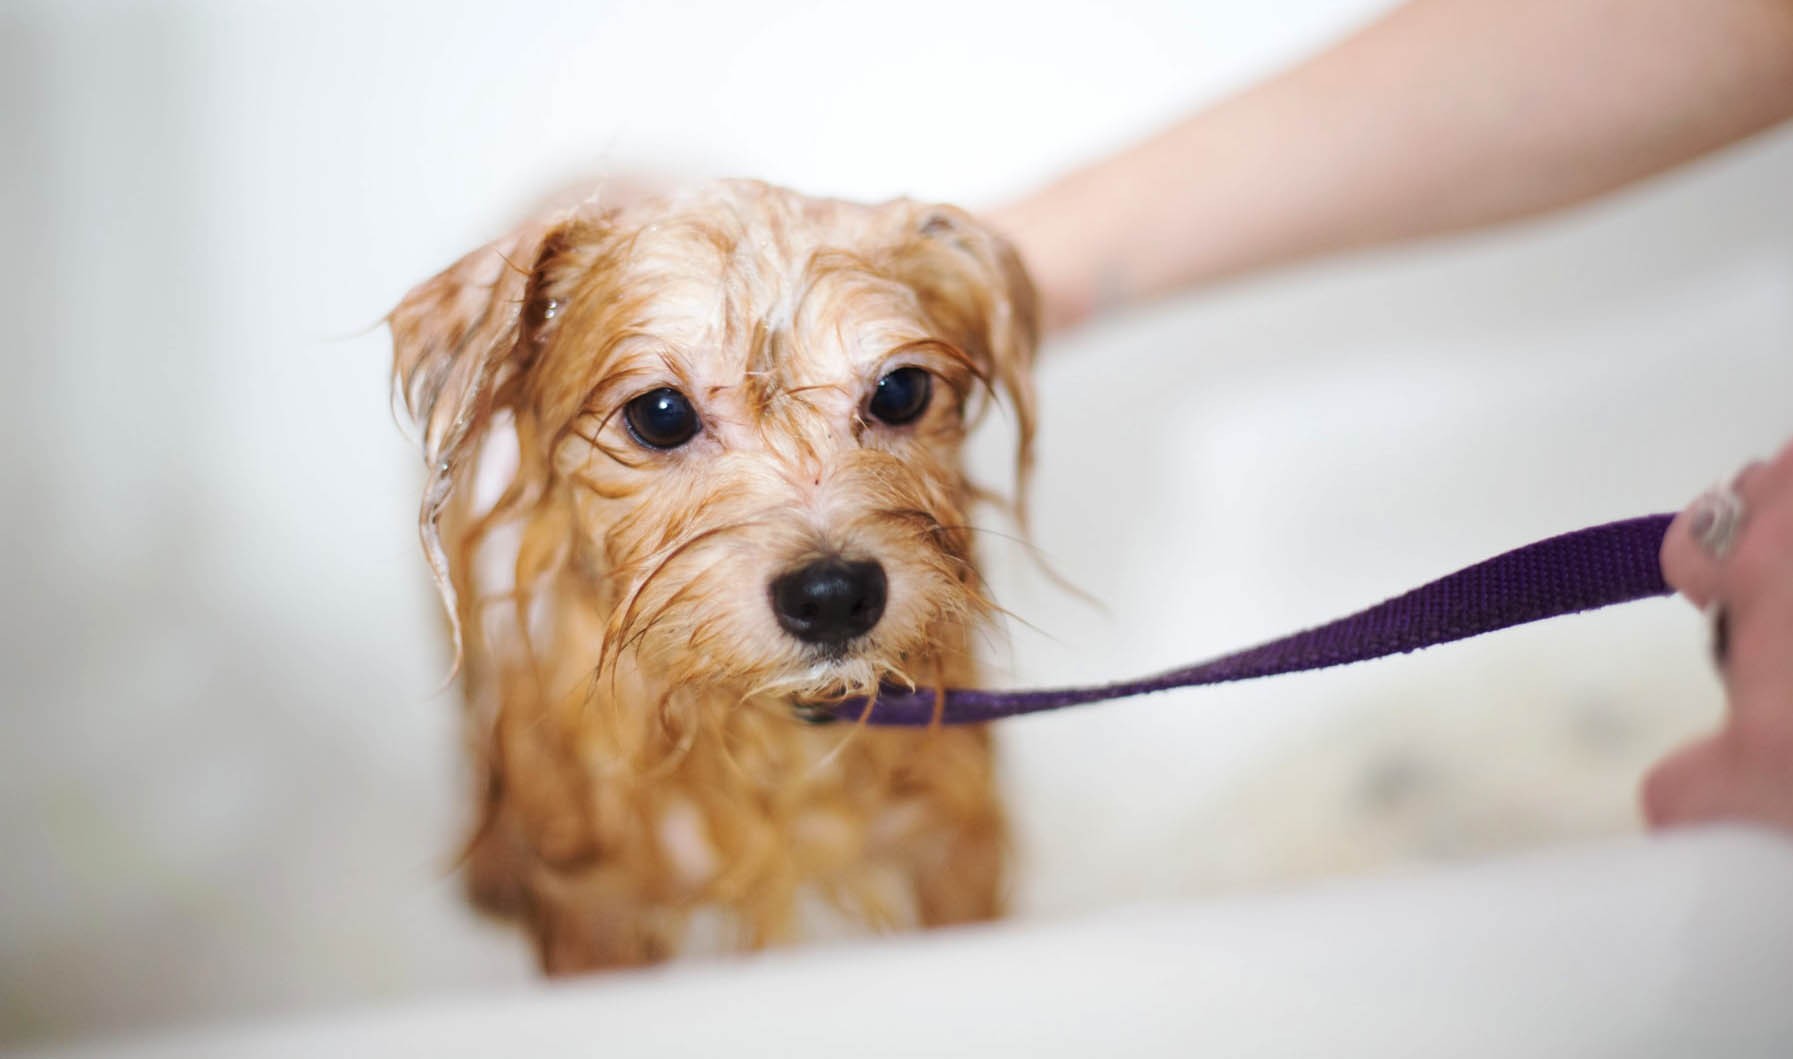 Is Dove Body Wash Safe For Dogs?